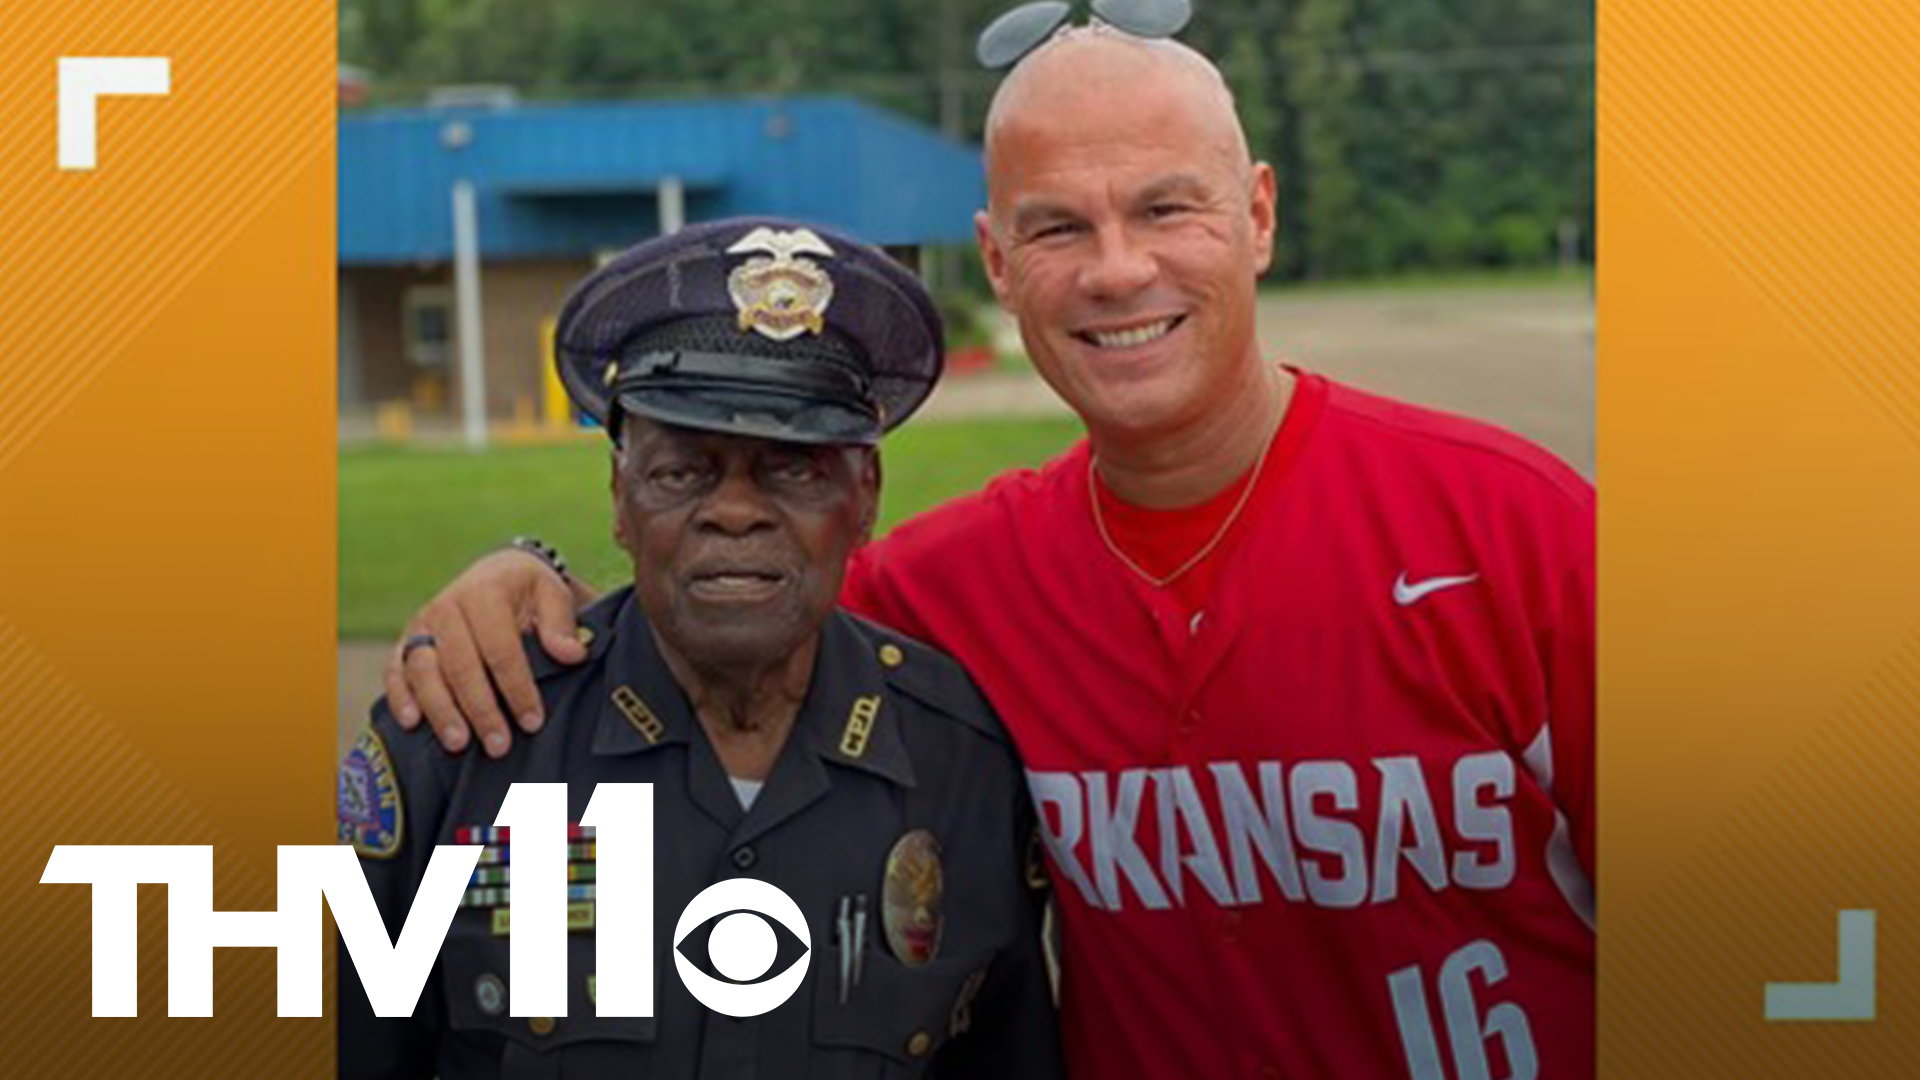 As Tommy Norman made his way through Camden, he couldn't help but to stop and shake the hand of the oldest working police officer in Arkansas, Buckshot.